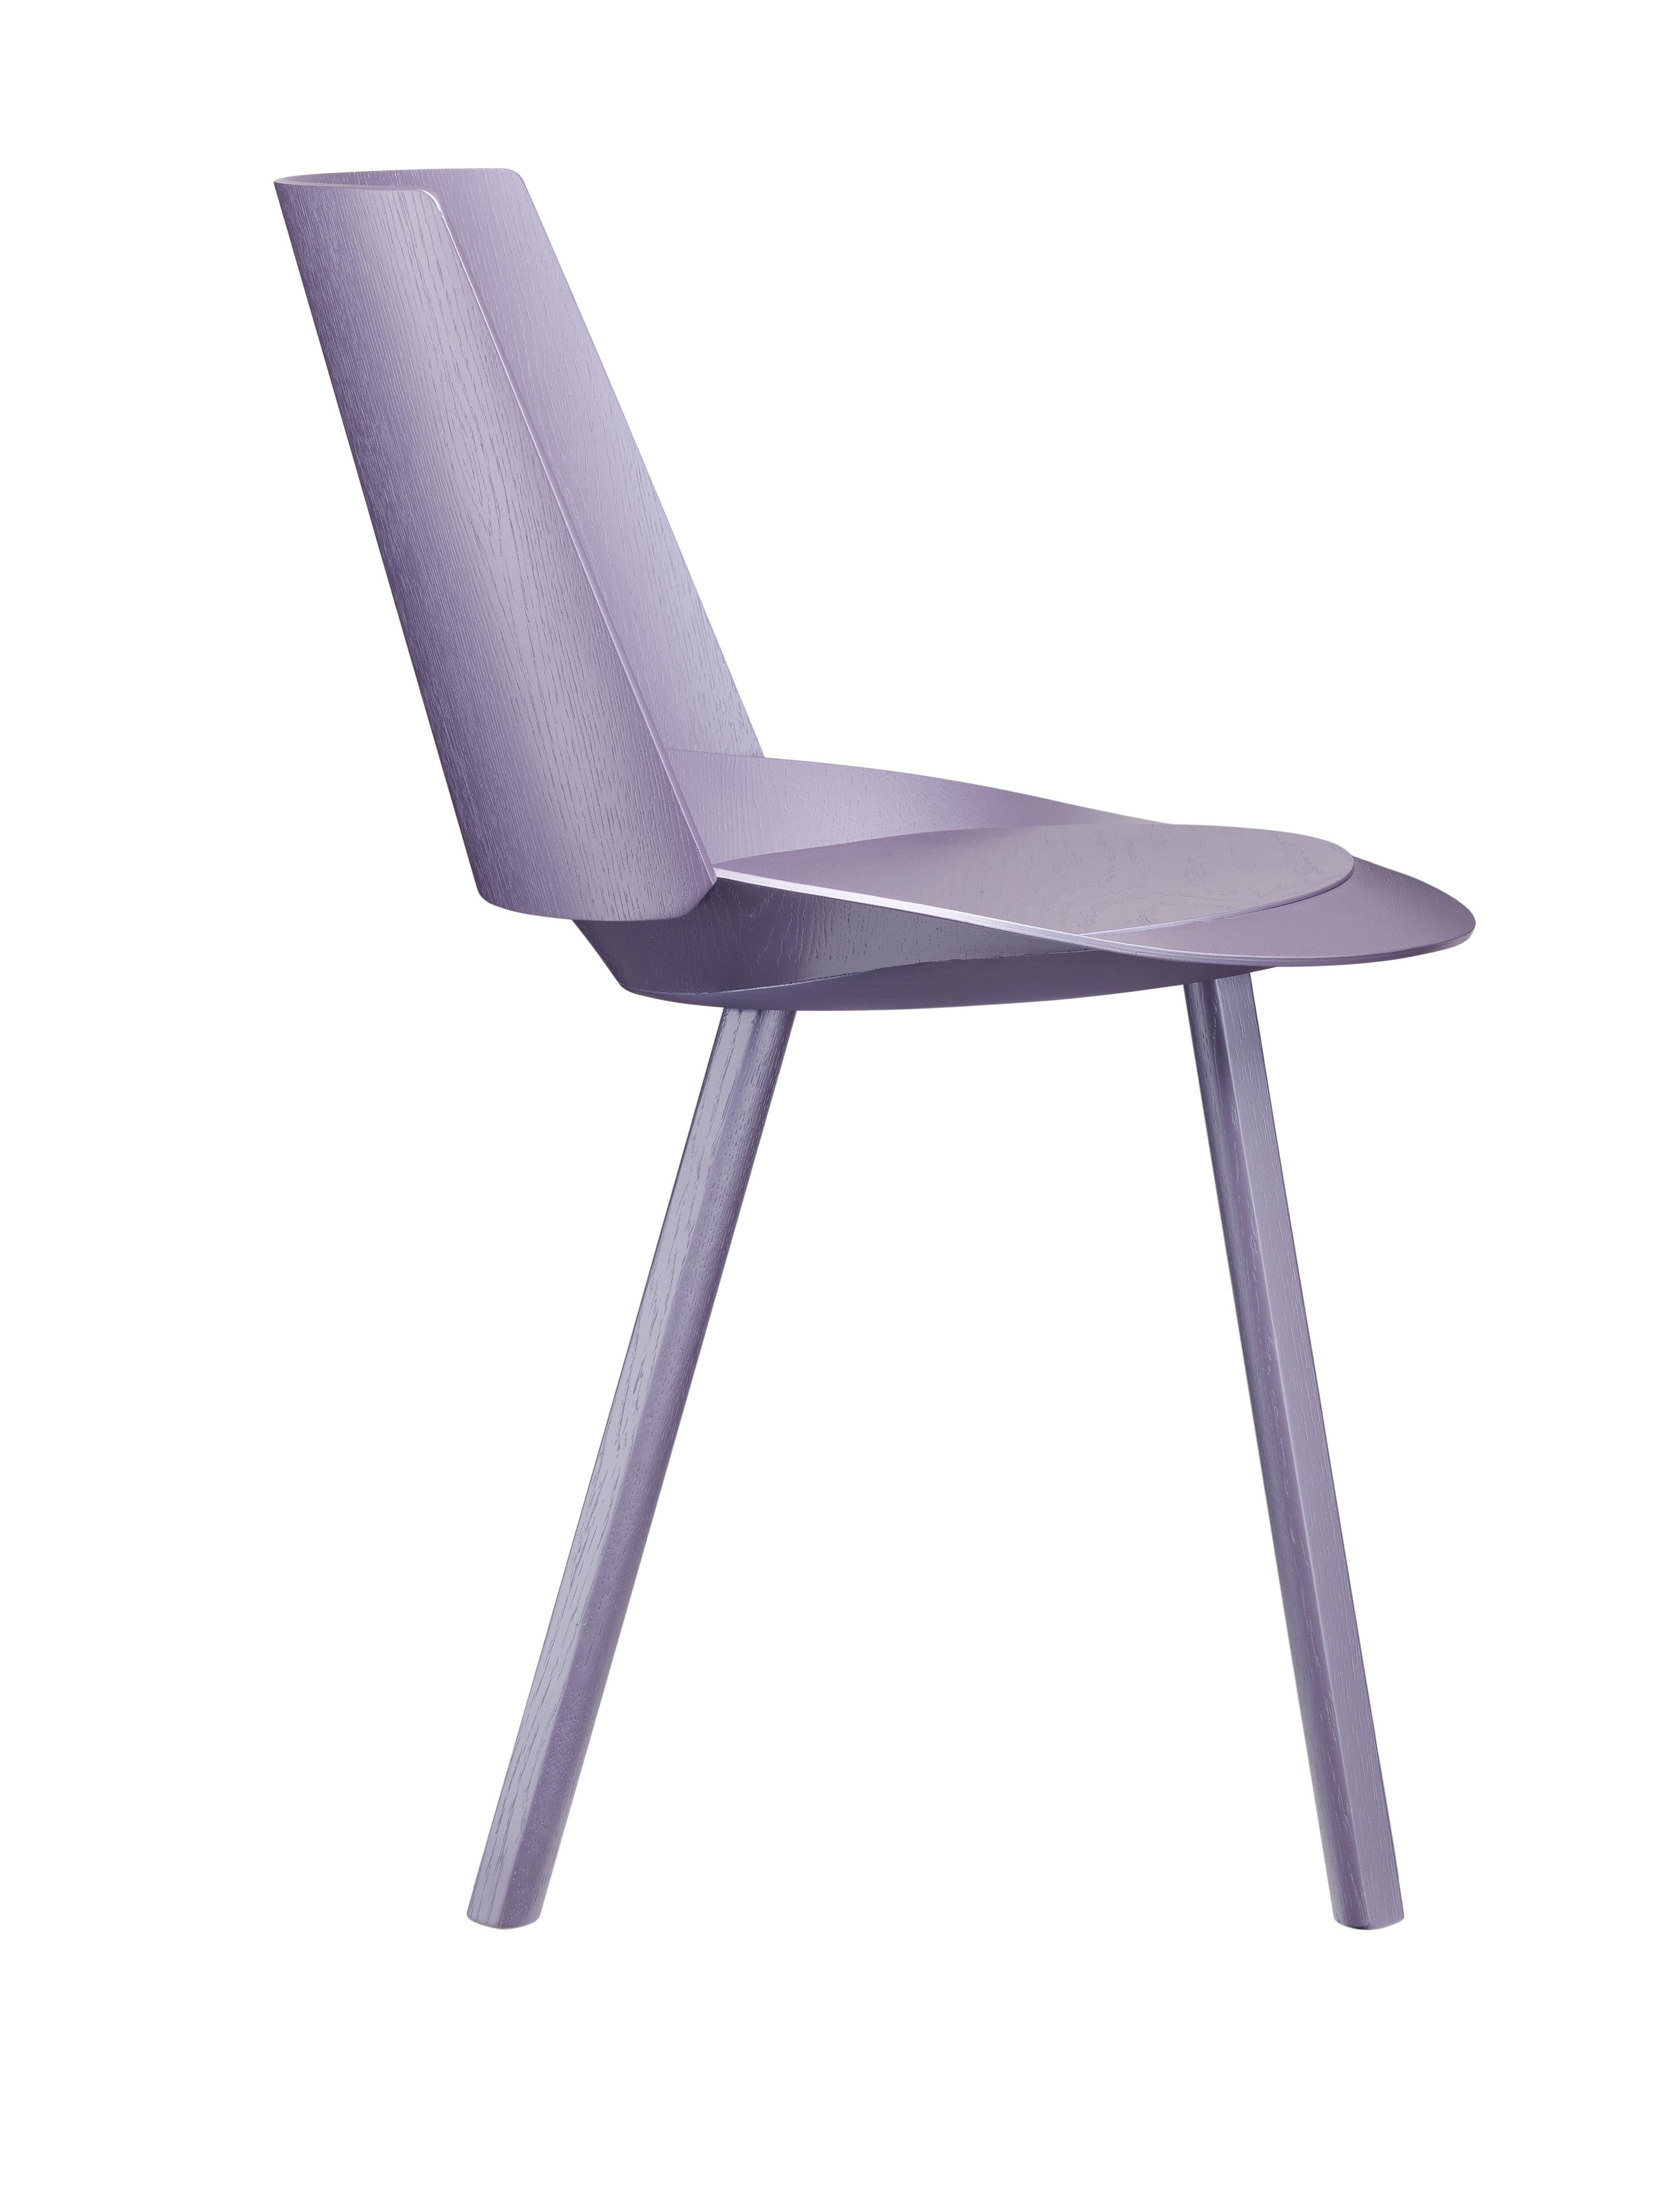 For Sale: Purple (Astro Violet Lacquer) e15 Customizable Houdini Side Chair by Stefan Diez 2